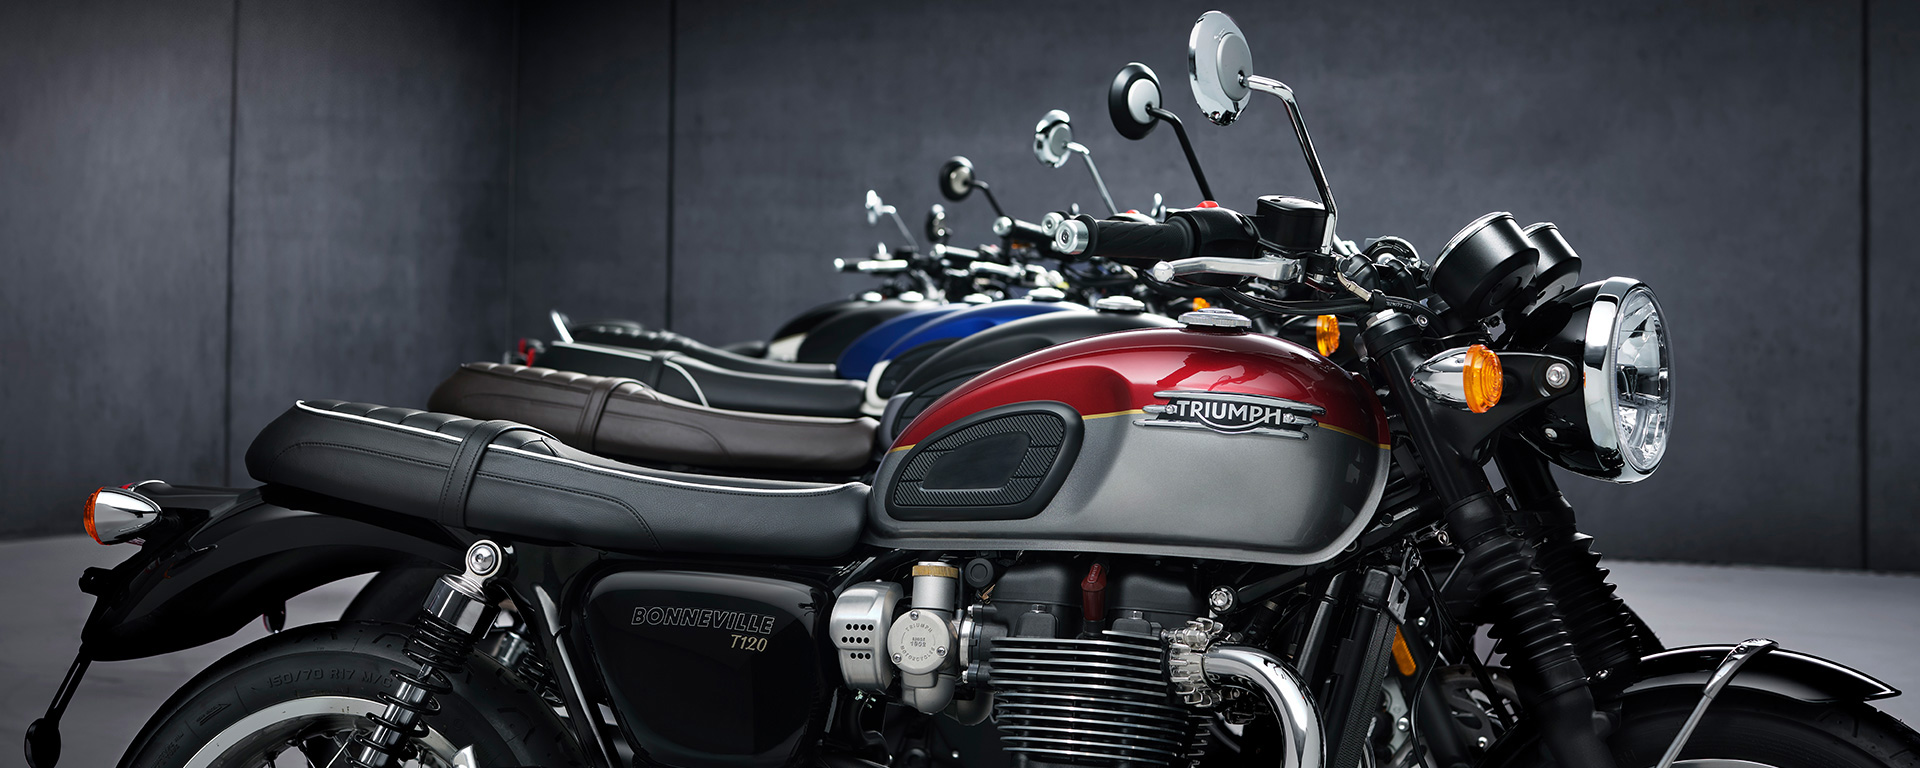 I. Introduction to Triumph Motorcycles: Classic Style and Modern Engineering